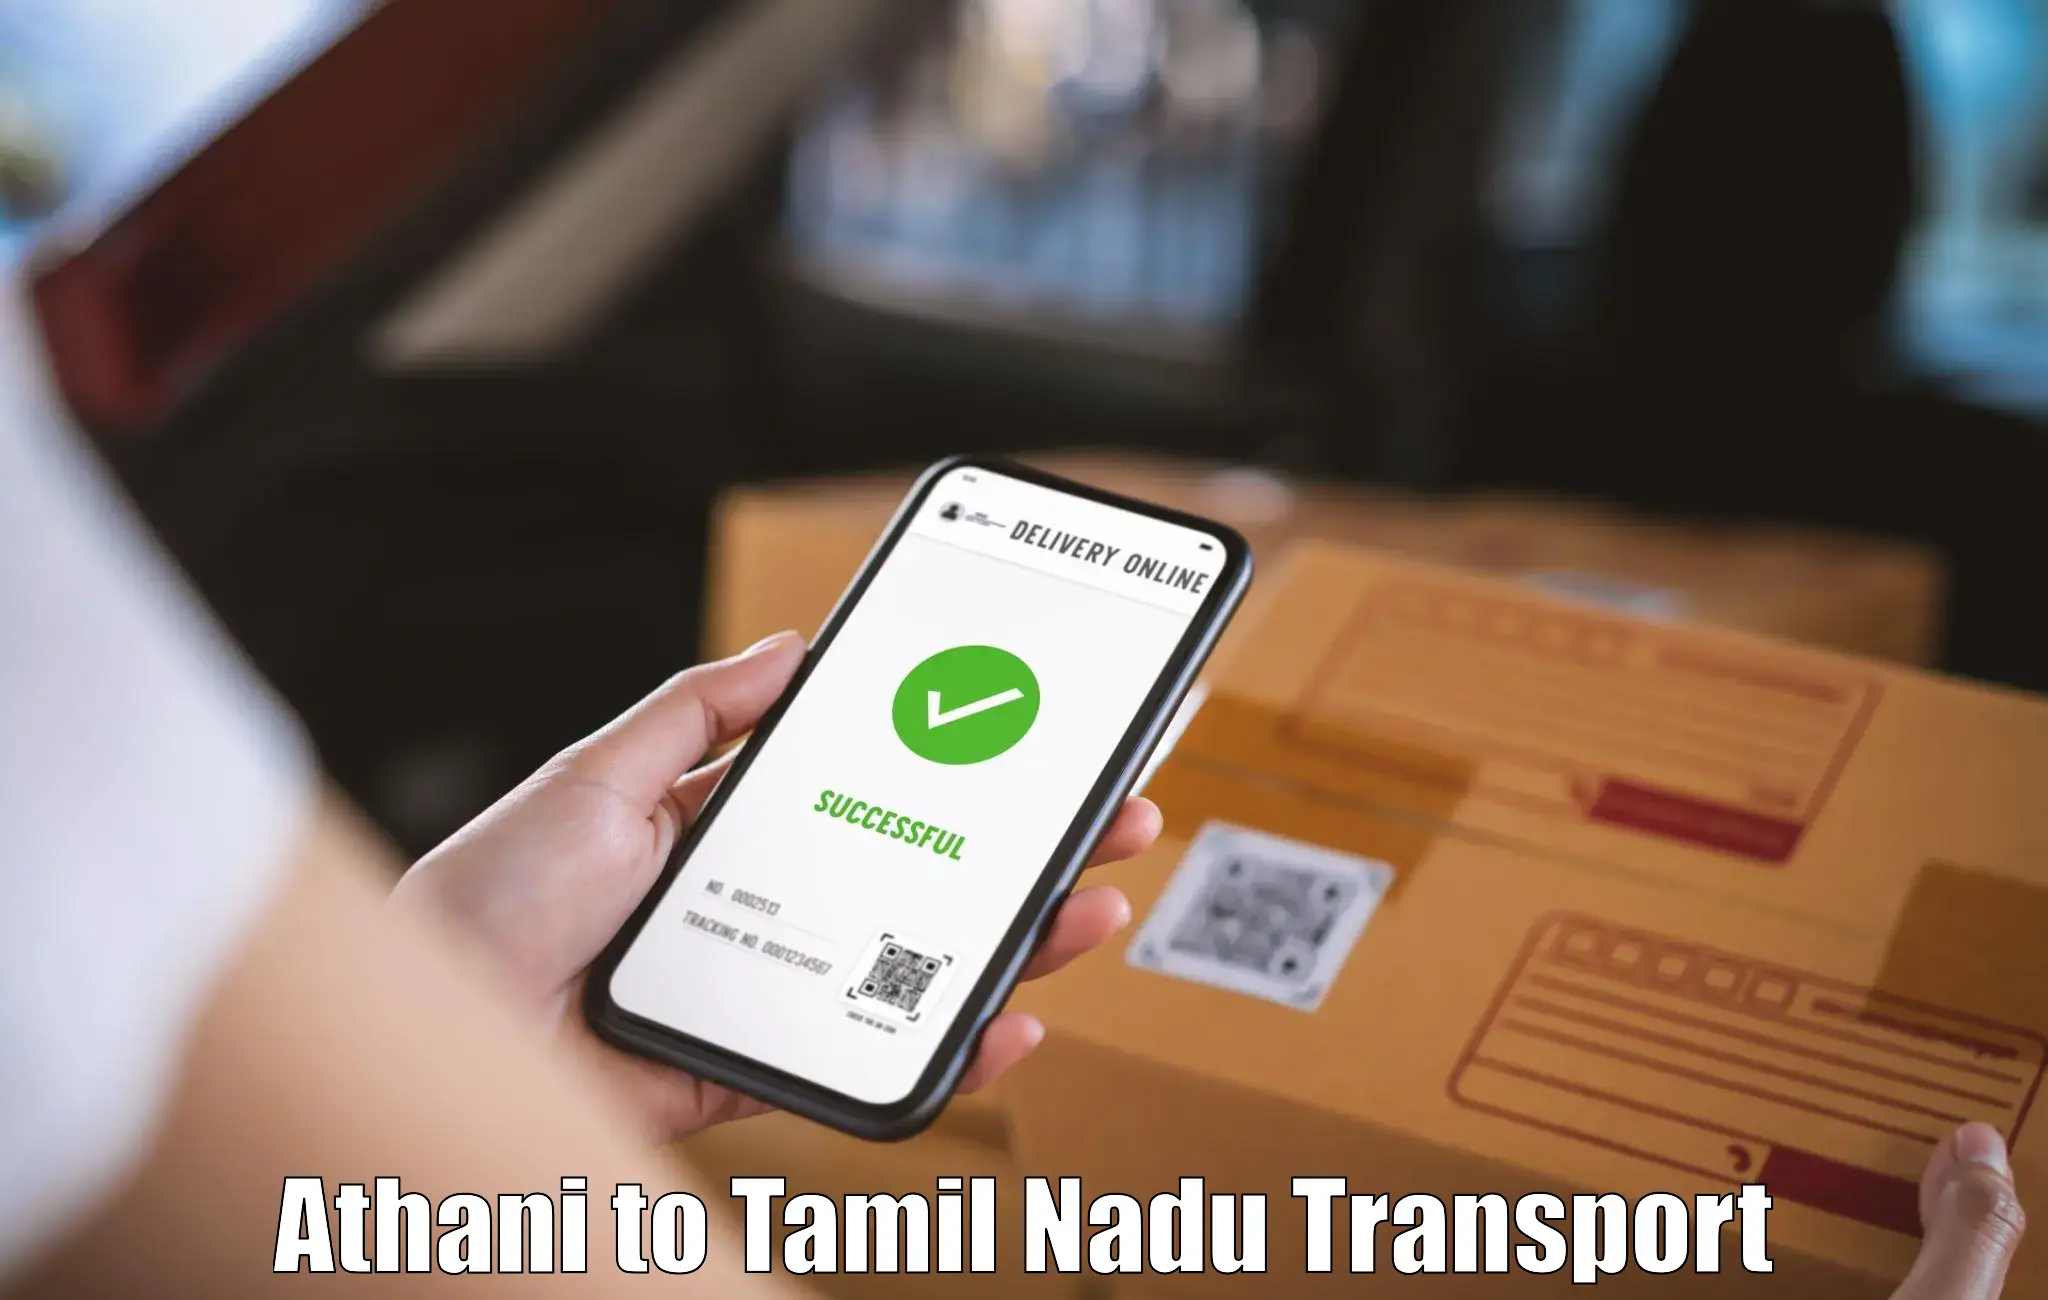 Transport shared services in Athani to Orathanadu